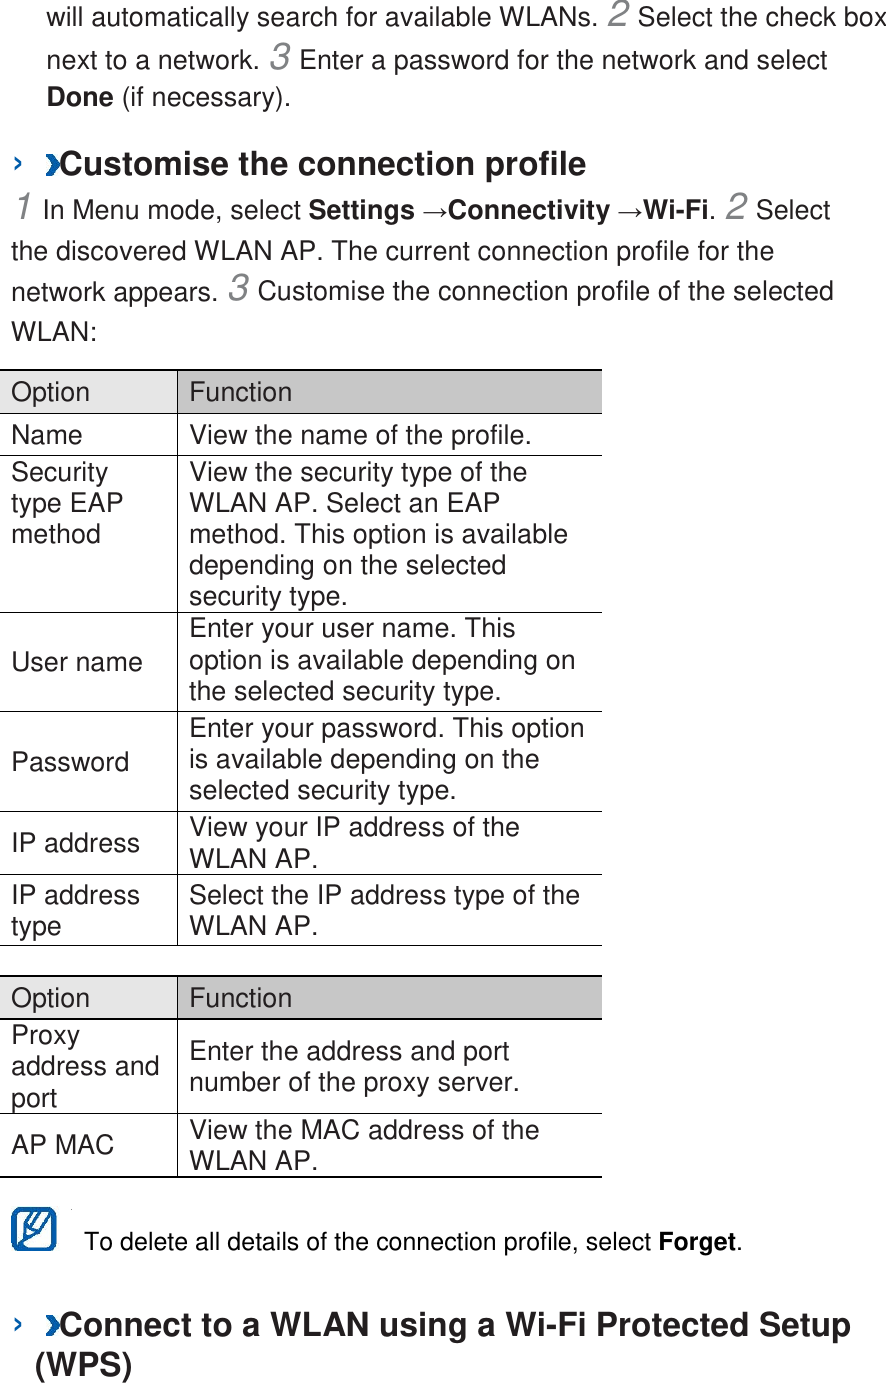 will automatically search for available WLANs. 2 Select the check box next to a network. 3 Enter a password for the network and select Done (if necessary).   ›  Customise the connection profile   1 In Menu mode, select Settings →Connectivity →Wi-Fi. 2 Select the discovered WLAN AP. The current connection profile for the network appears. 3 Customise the connection profile of the selected WLAN:   Option    Function   Name    View the name of the profile.   Security type EAP method   View the security type of the WLAN AP. Select an EAP method. This option is available depending on the selected security type.   User name   Enter your user name. This option is available depending on the selected security type.   Password   Enter your password. This option is available depending on the selected security type.   IP address   View your IP address of the WLAN AP.   IP address type   Select the IP address type of the WLAN AP.    Option    Function   Proxy address and port   Enter the address and port number of the proxy server.   AP MAC   View the MAC address of the WLAN AP.     To delete all details of the connection profile, select Forget.   ›  Connect to a WLAN using a Wi-Fi Protected Setup (WPS)   